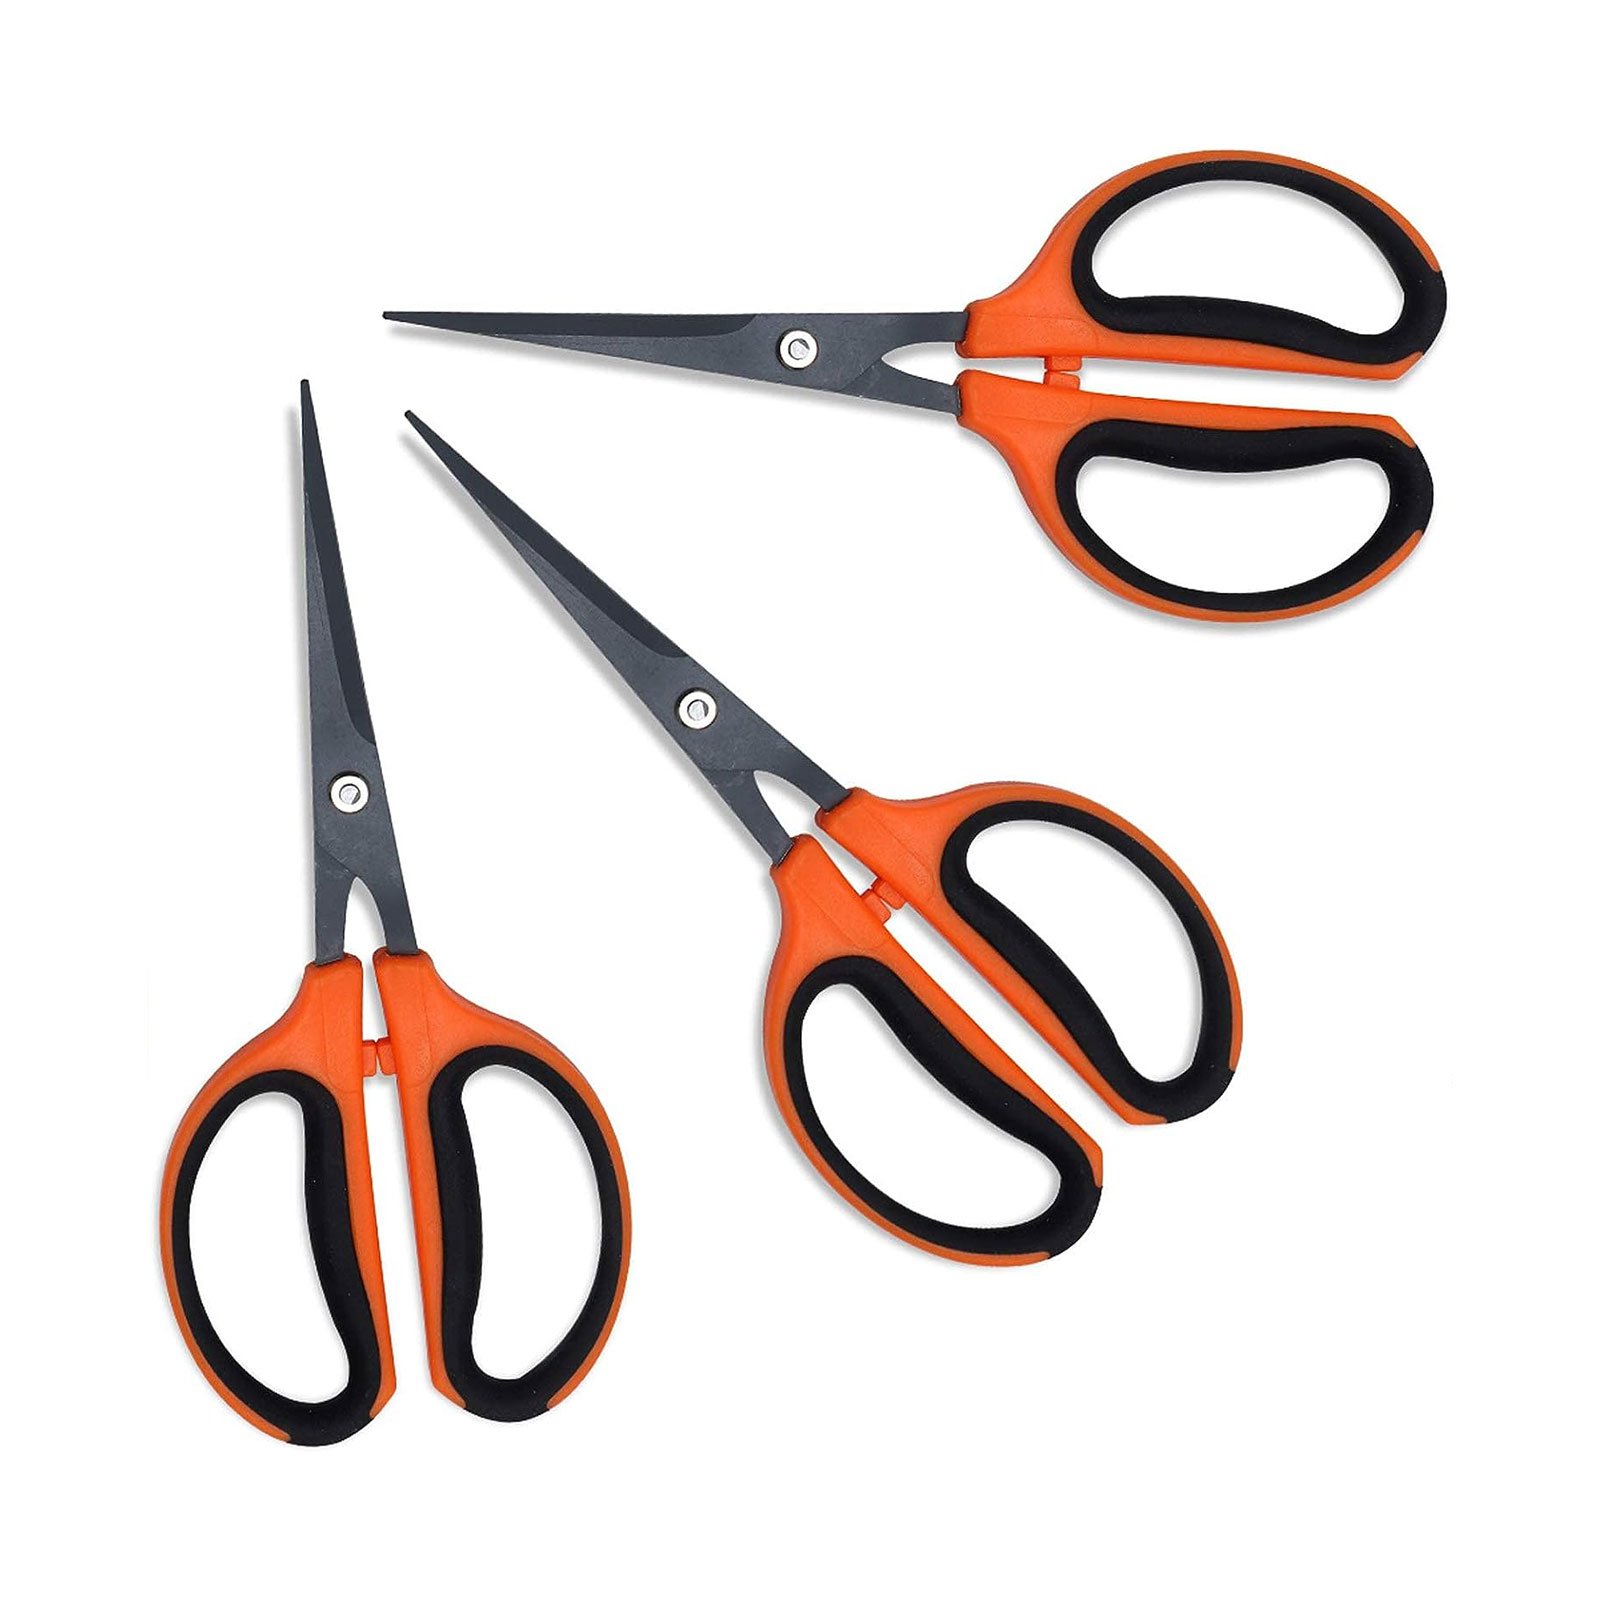 What's the Best Way To Clean Bud Trimming Scissors? - RQS Blog